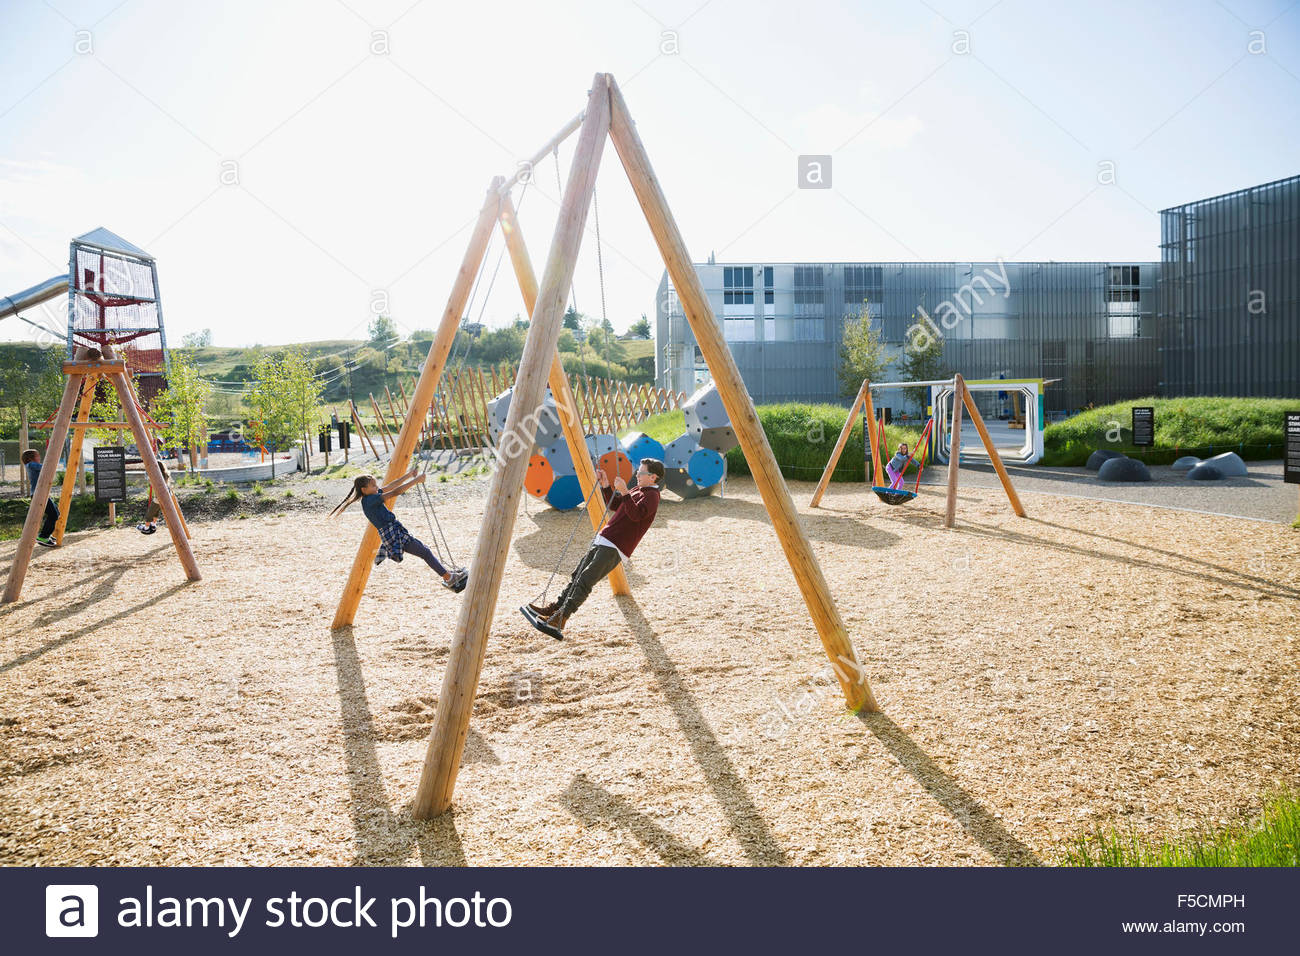 Kids playing on swings at sunny playground Stock Photo